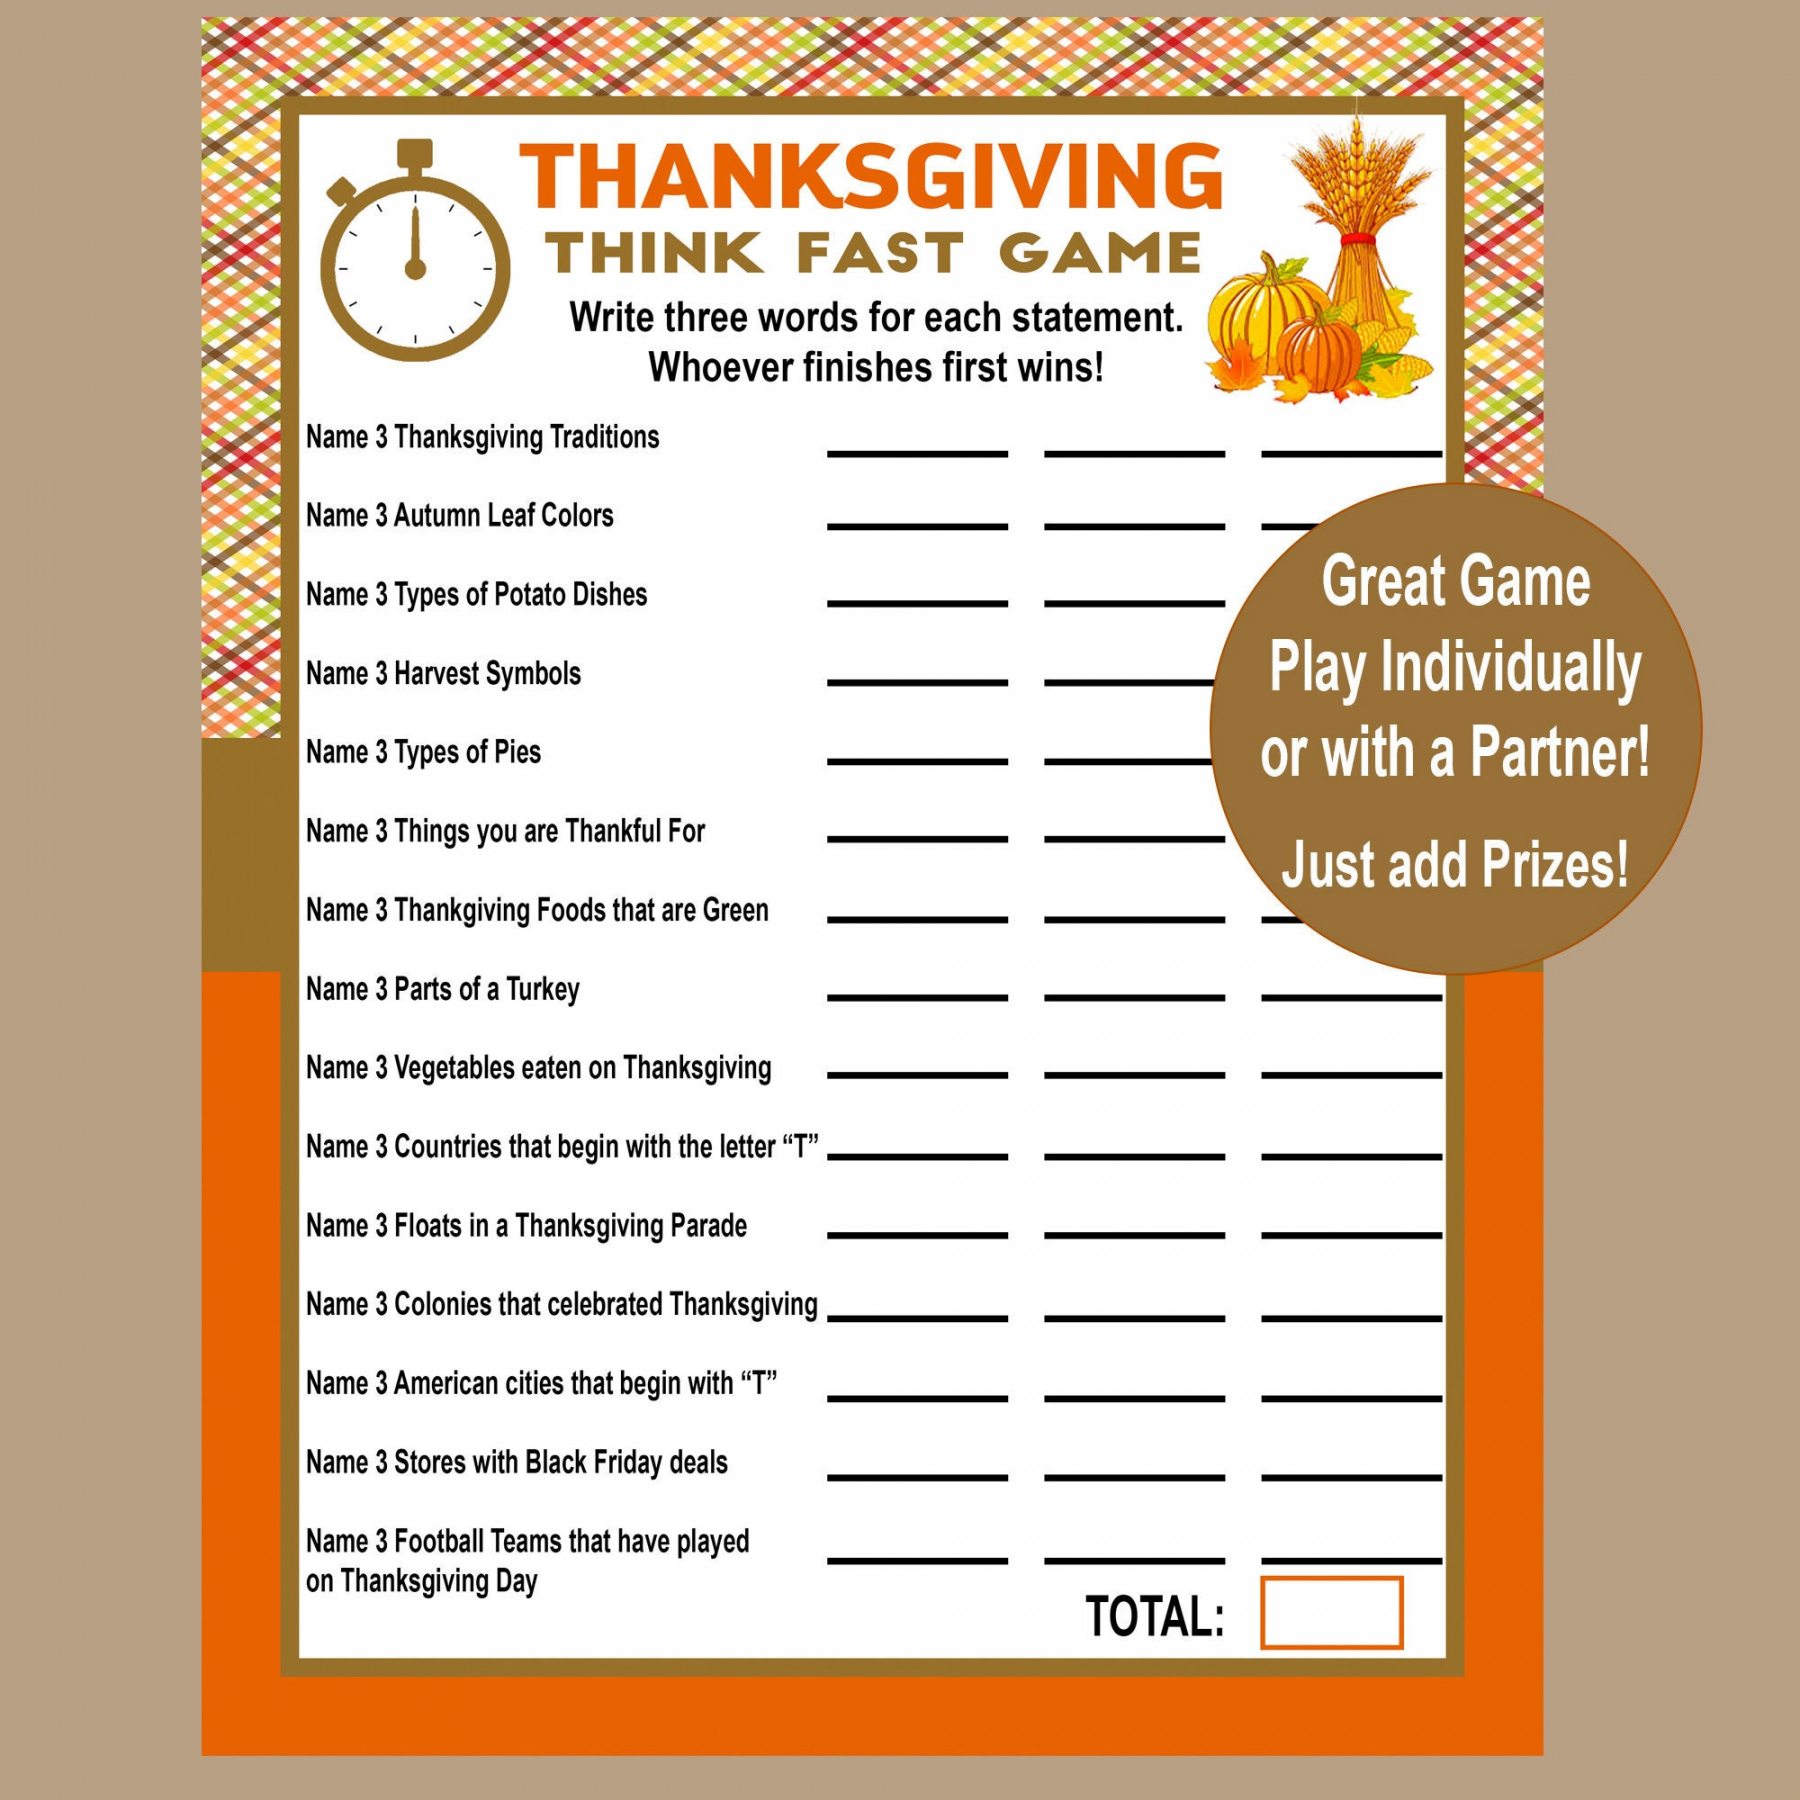 Free Printable Thanksgiving Games - Printable - Thanksgiving Trivia Game, Think Fast Game, Thanksgiving Printable Games,  Fun Friendsgiving Game, Zoom Game, Family Game, Instant Download